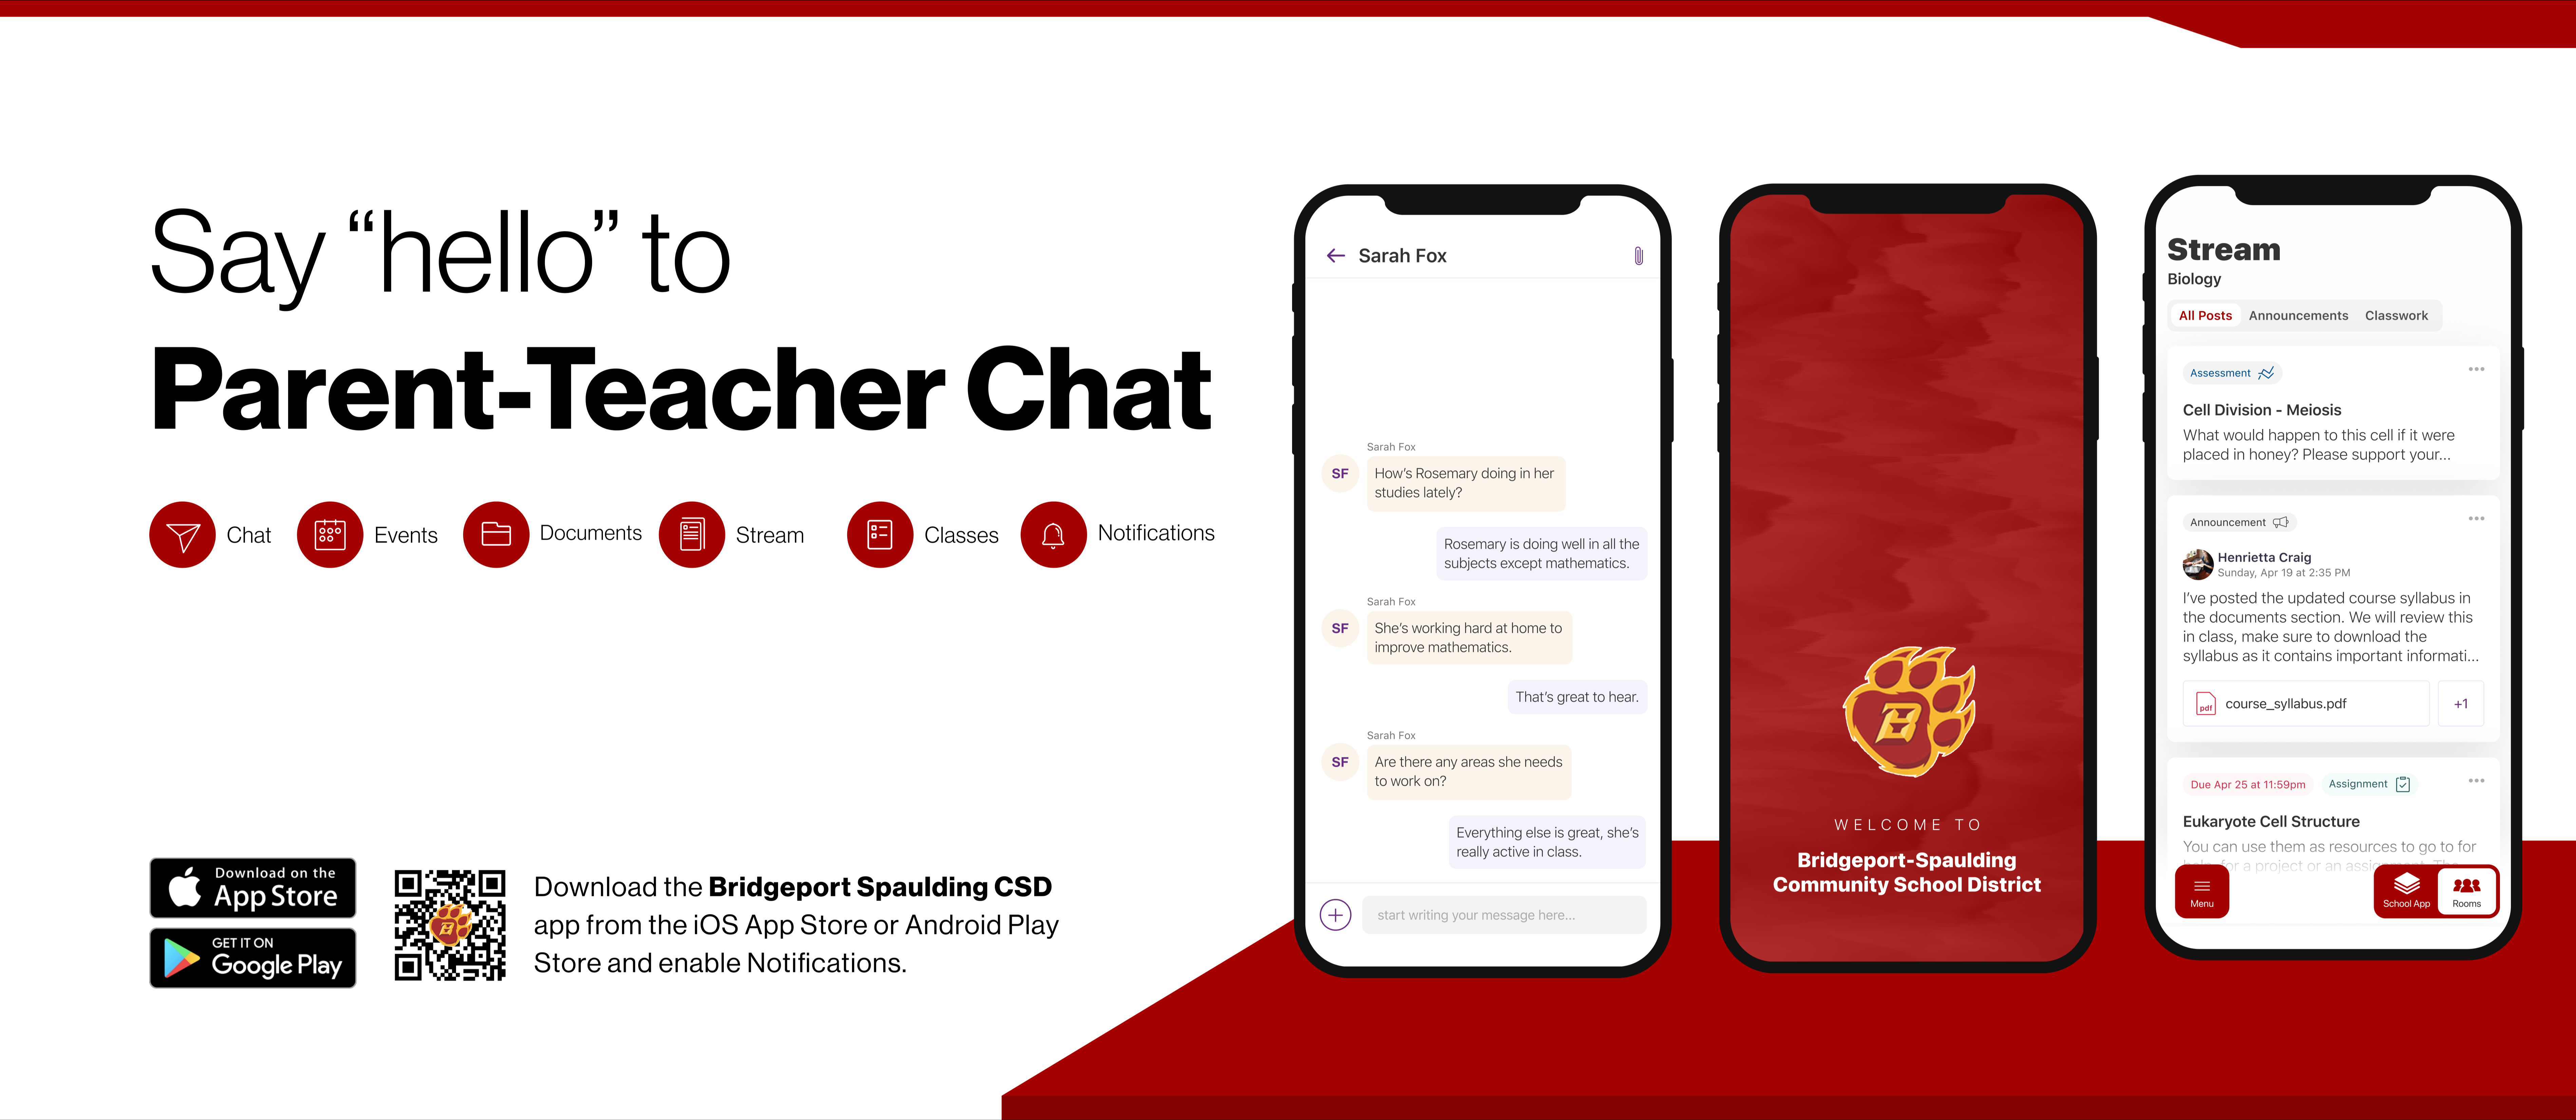 say hello to parent-teacher chat